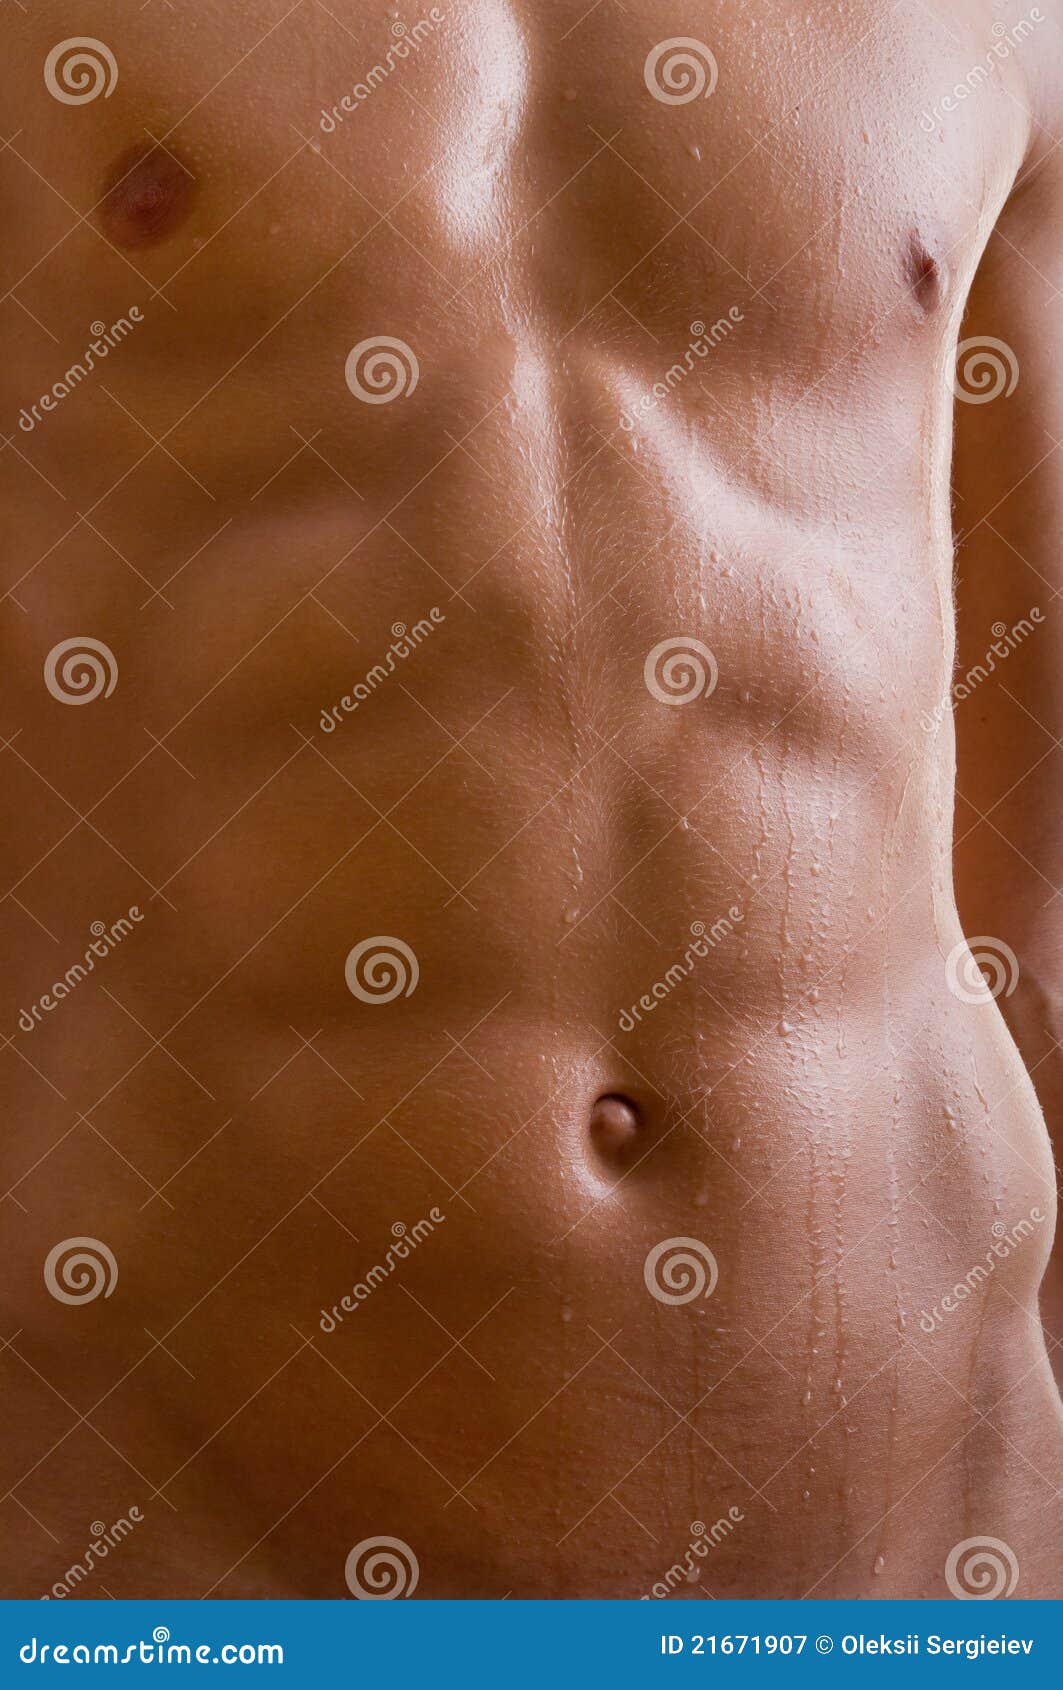 Male outie belly button